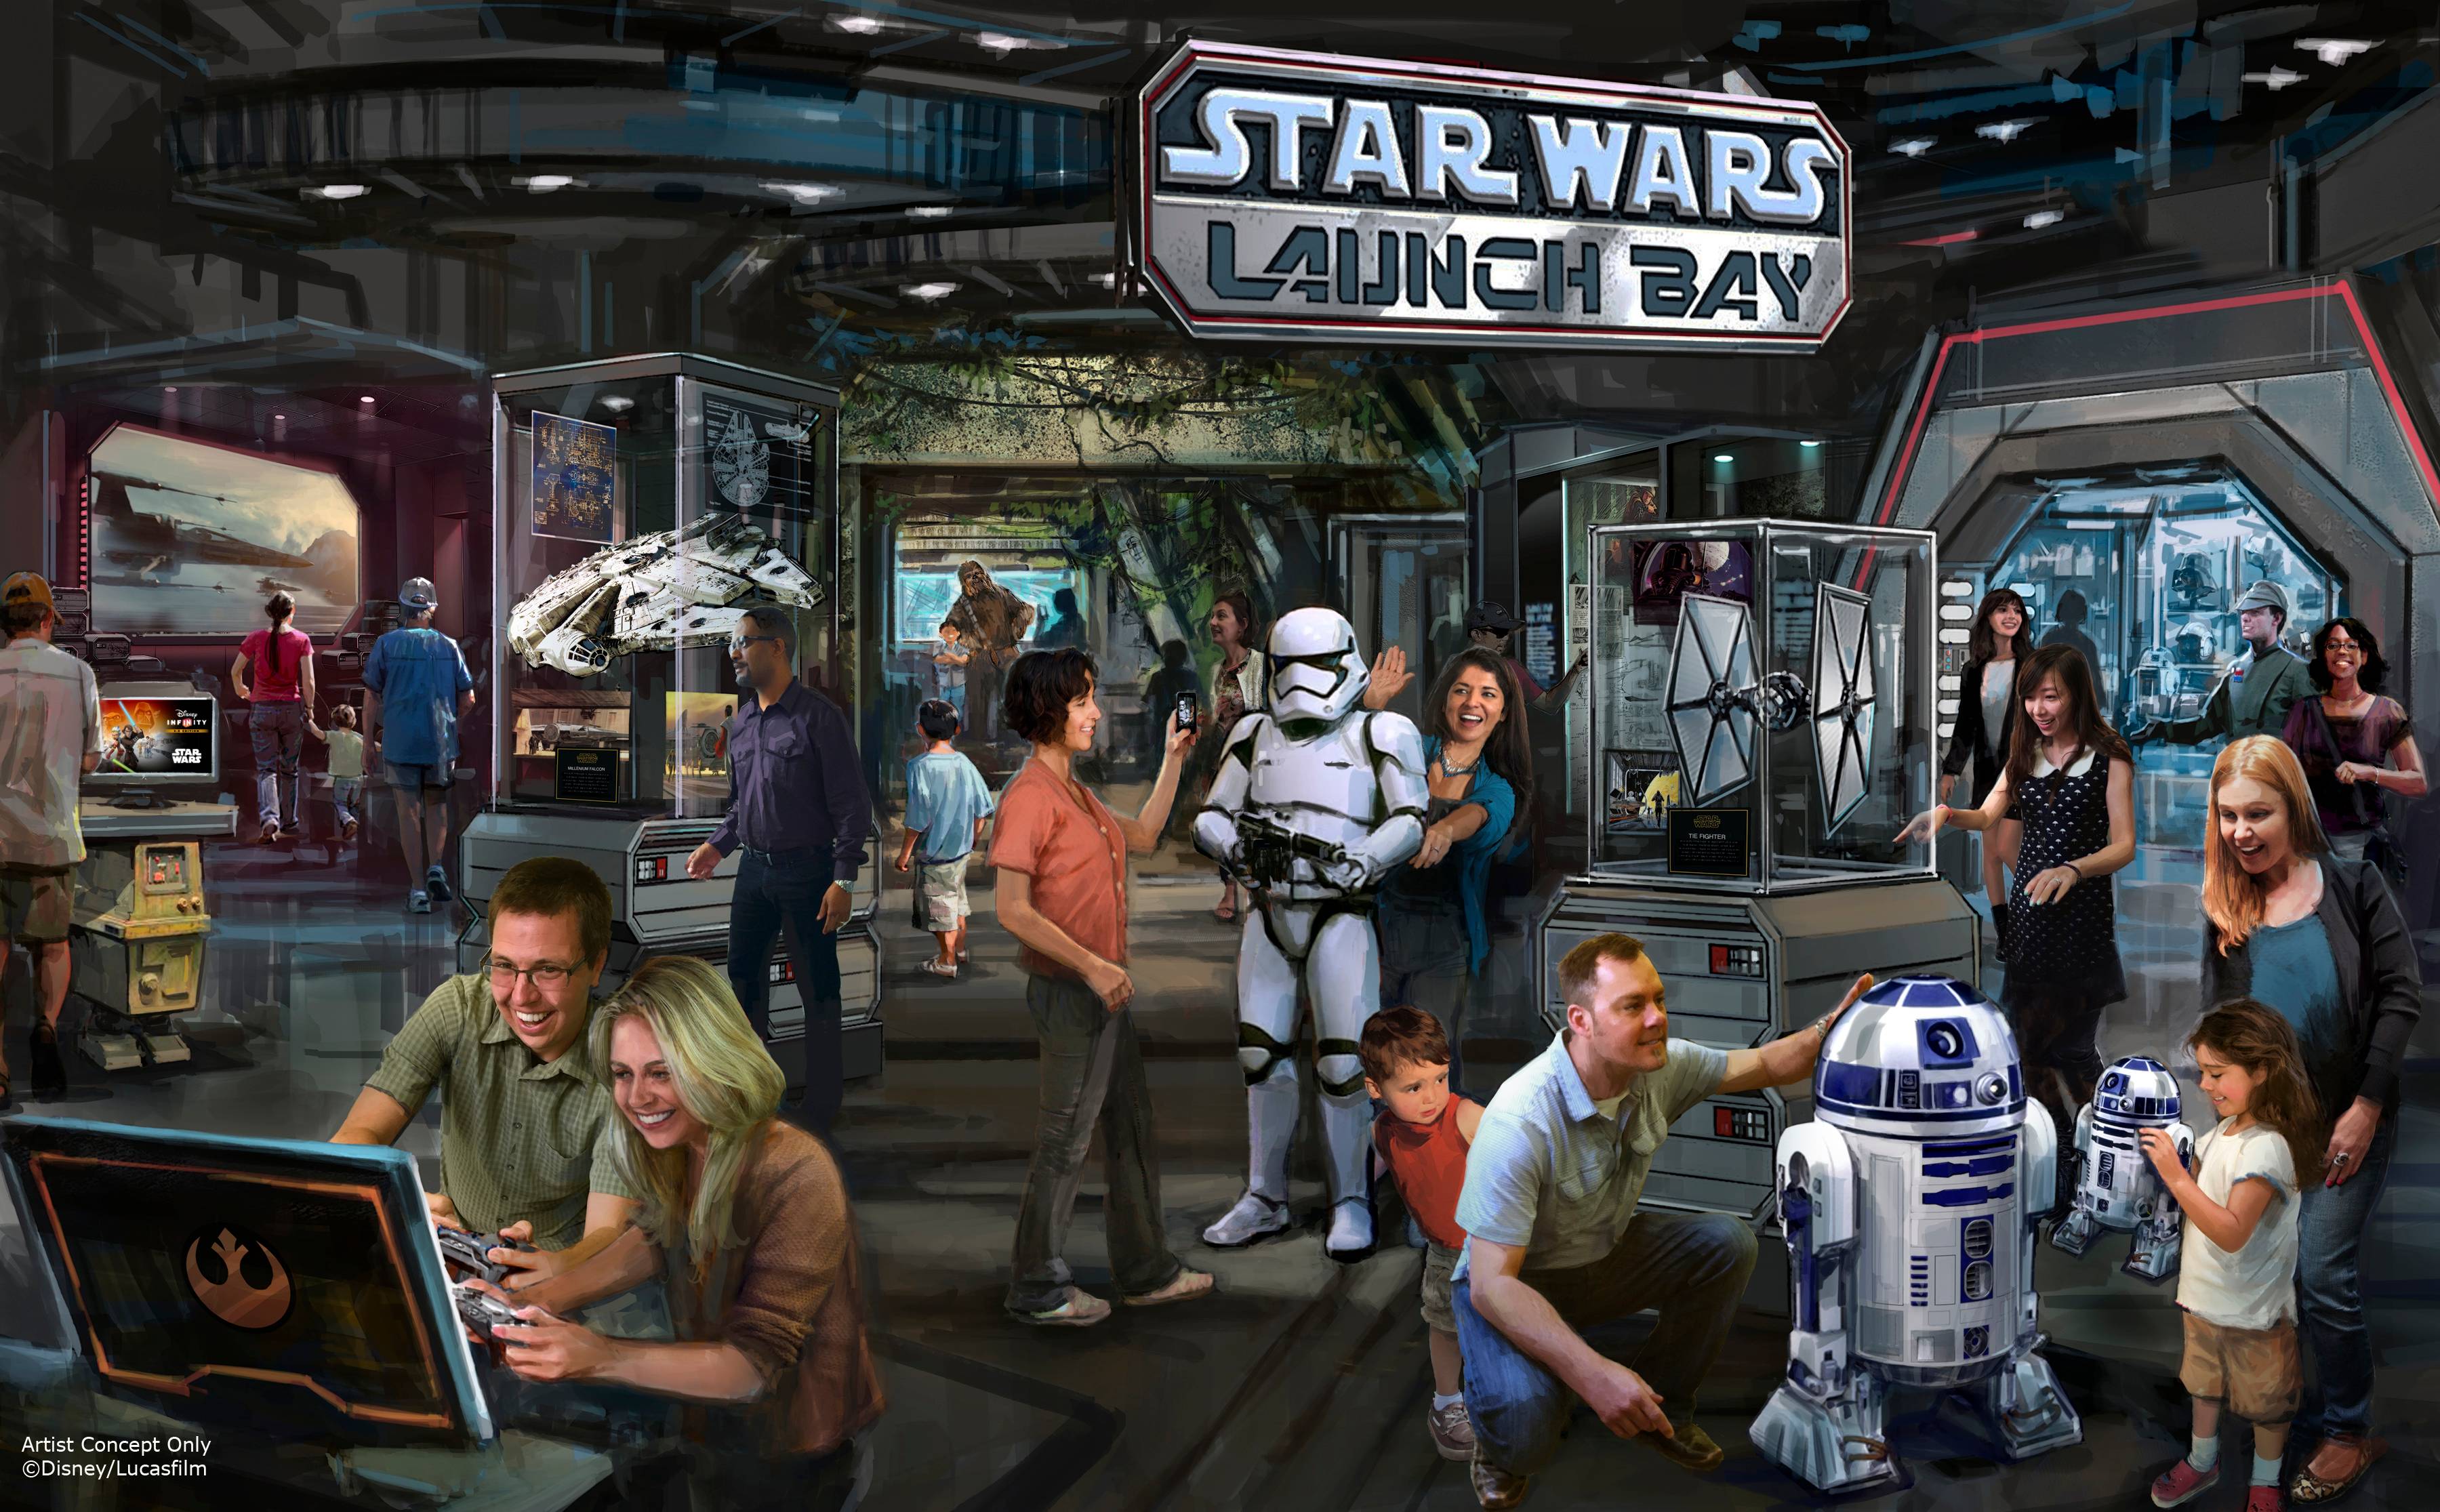 Star Wars Launch Bay coming to Disney's Hollywood Studios later this year